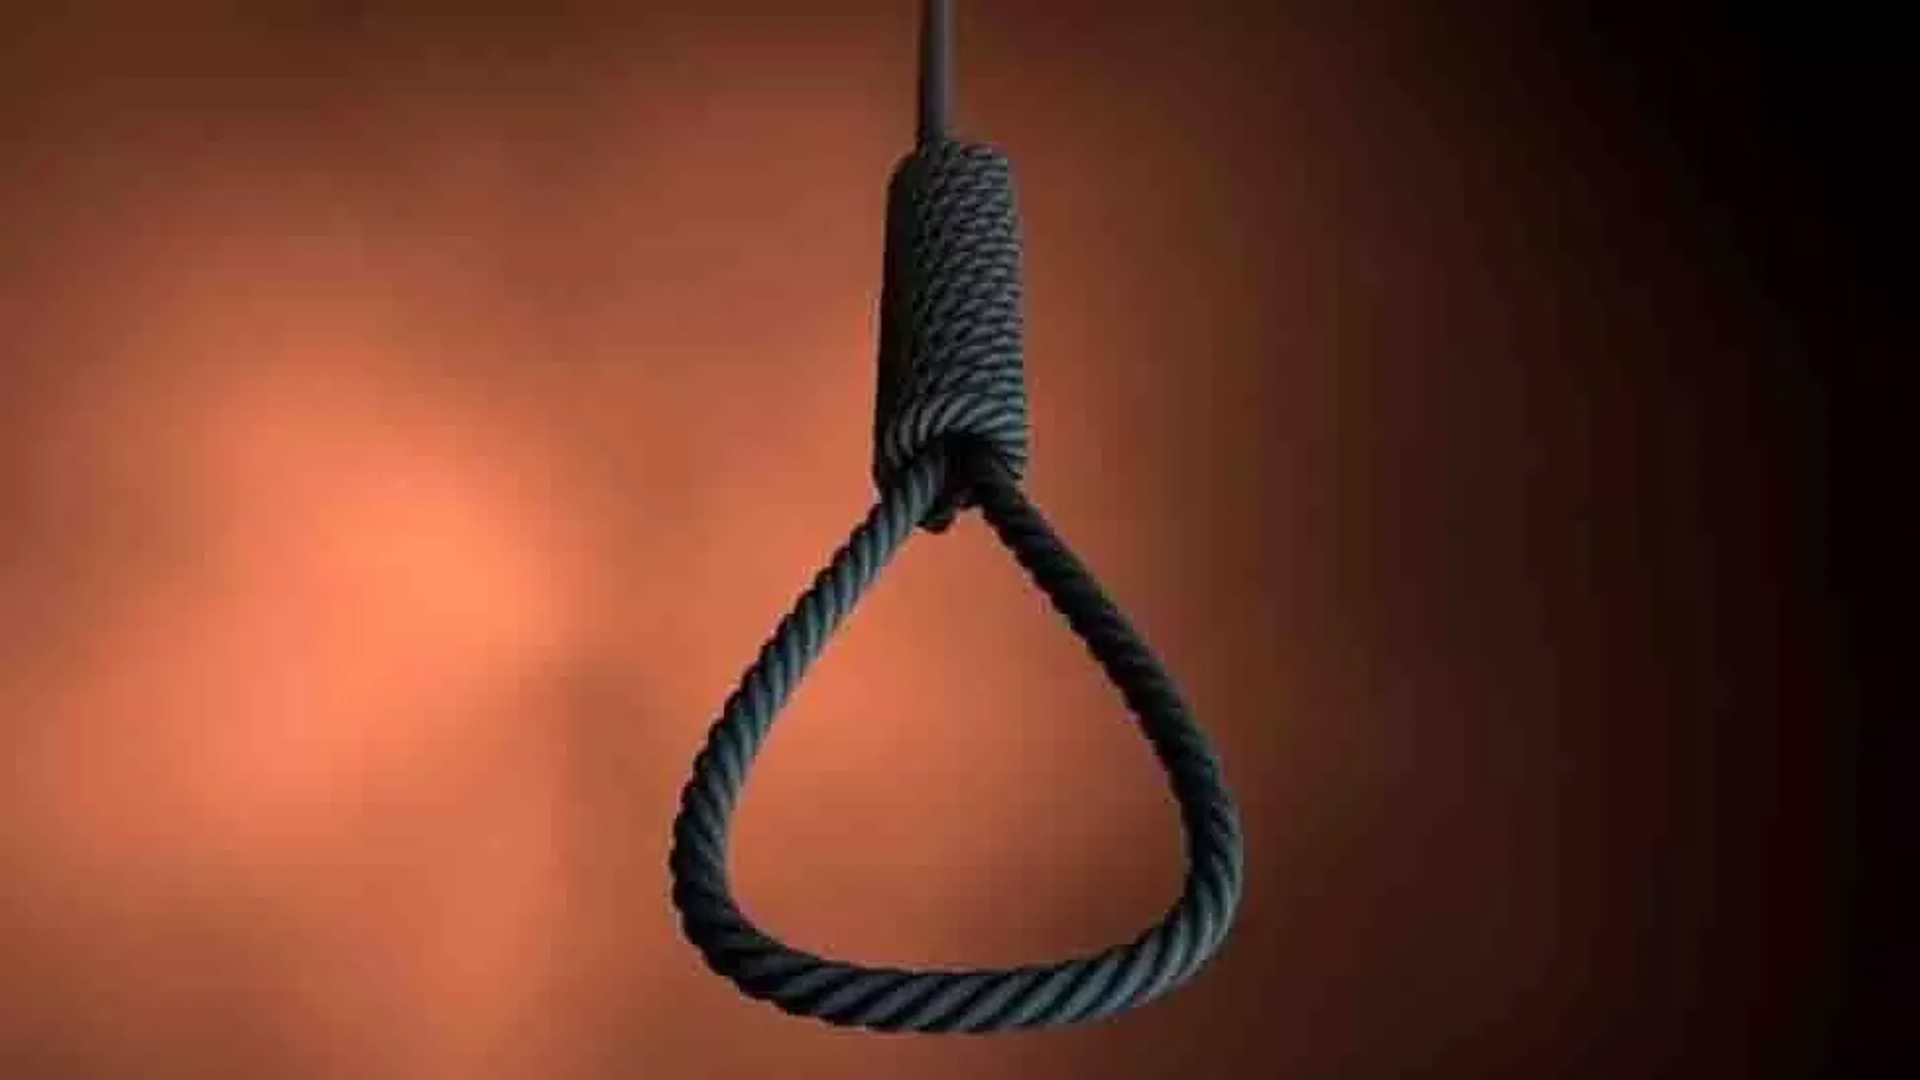 Headmistress committed suicide by hanging herself